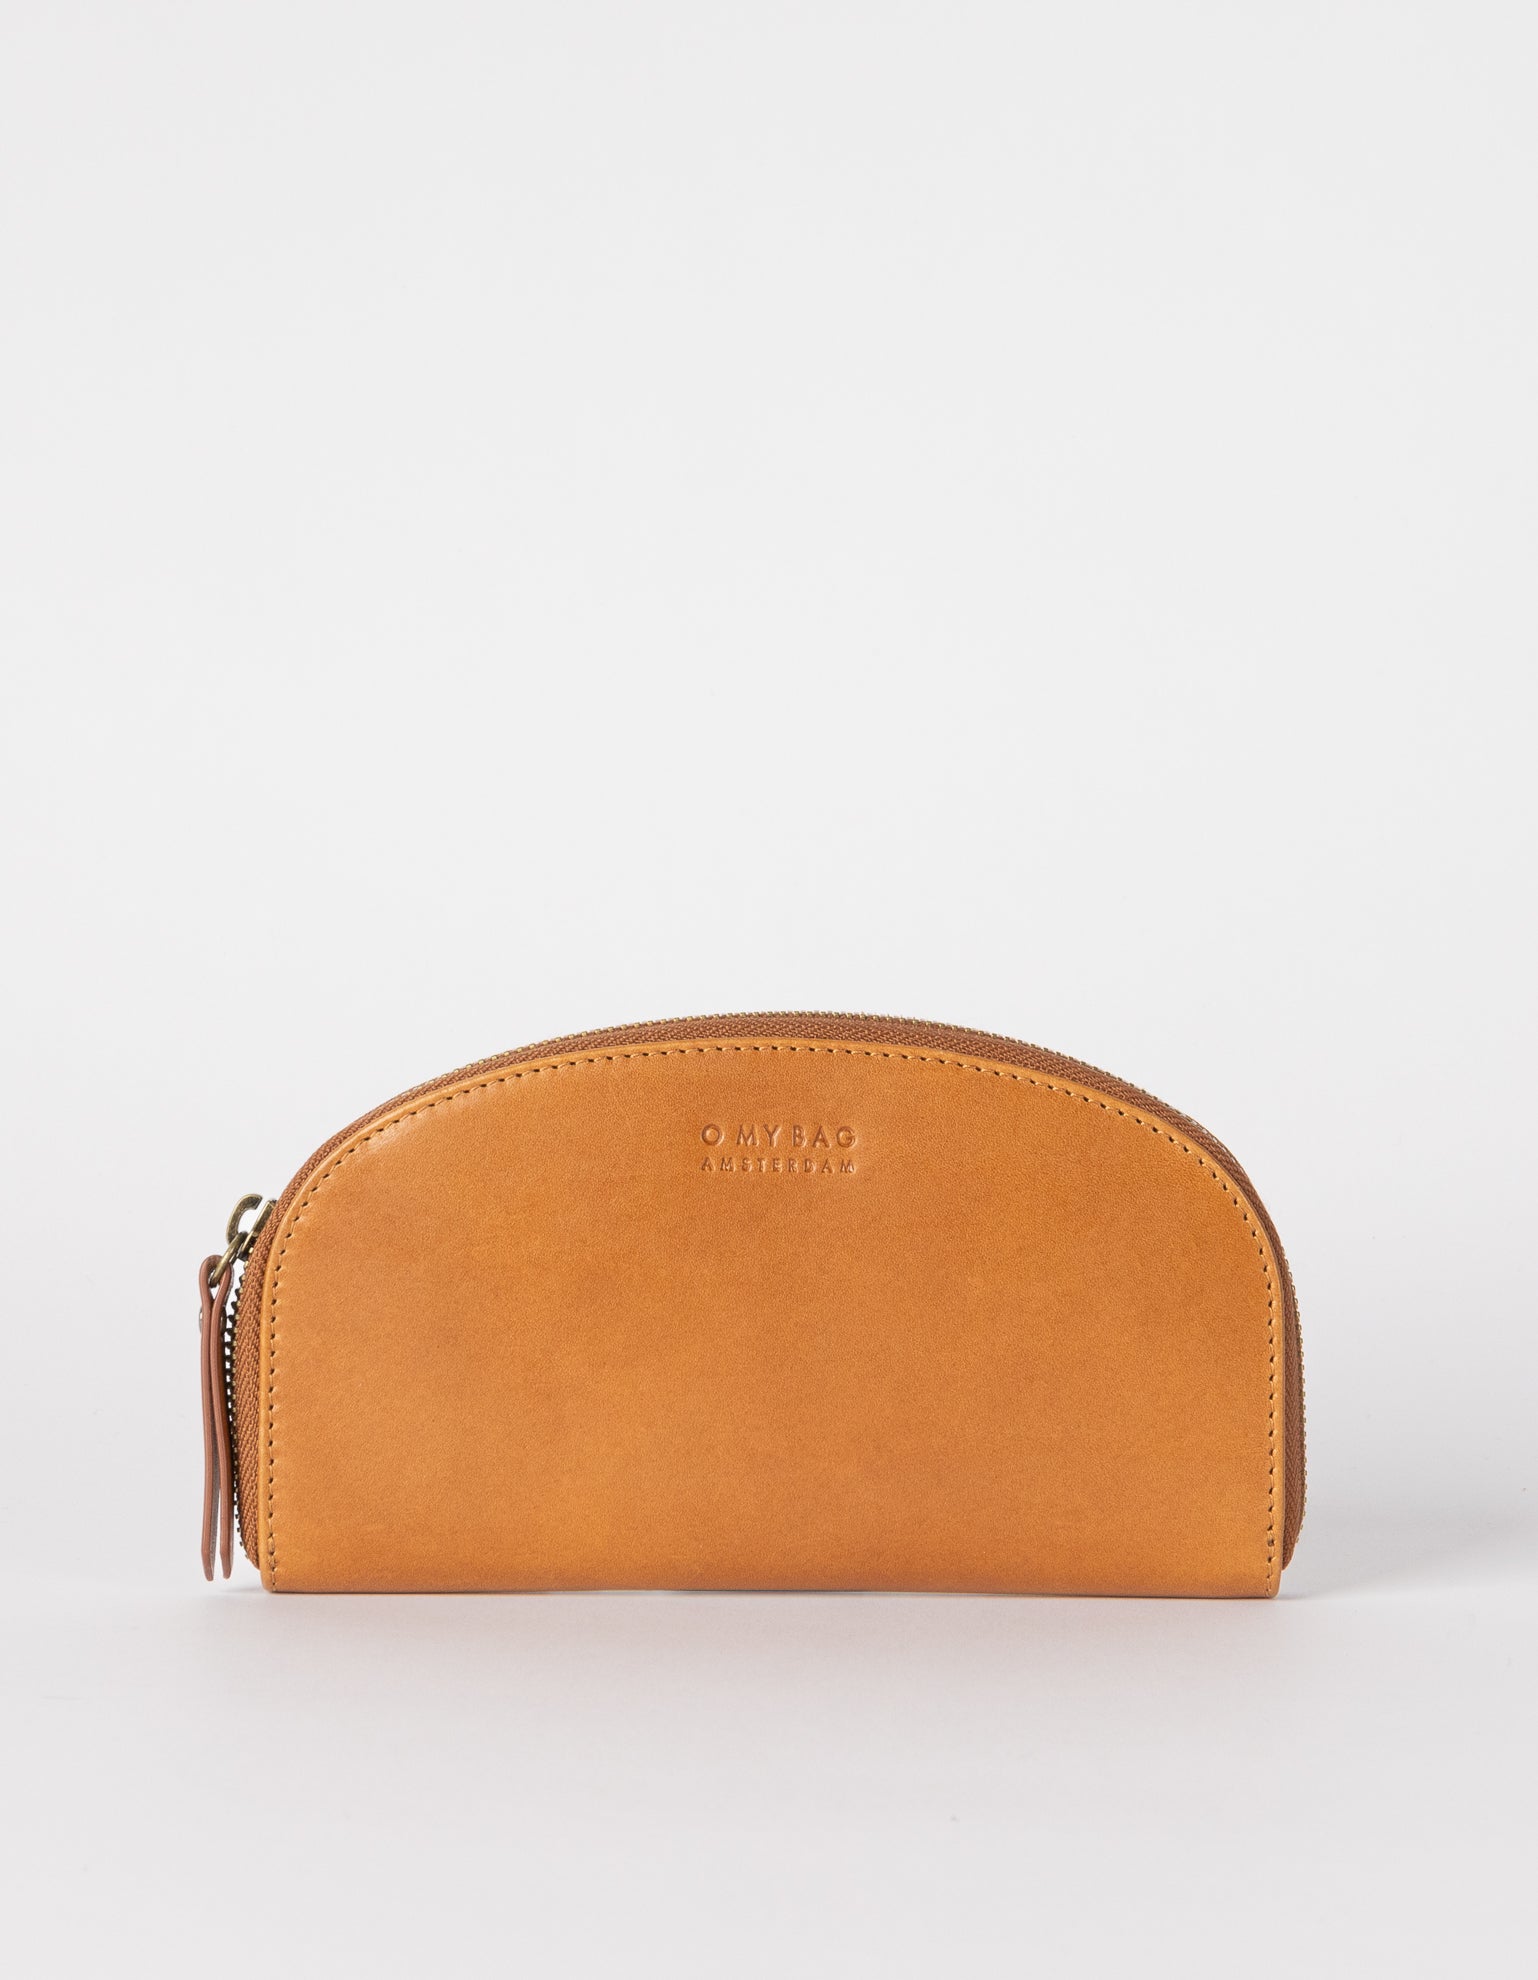 Introducing Blake, the smooth leather rounded wallet that's here to add a touch of chic charm to your everyday essentials. The roomy interior has a zip pocket for coins, eight card slots and two compartments for cash. Ethically made in India.